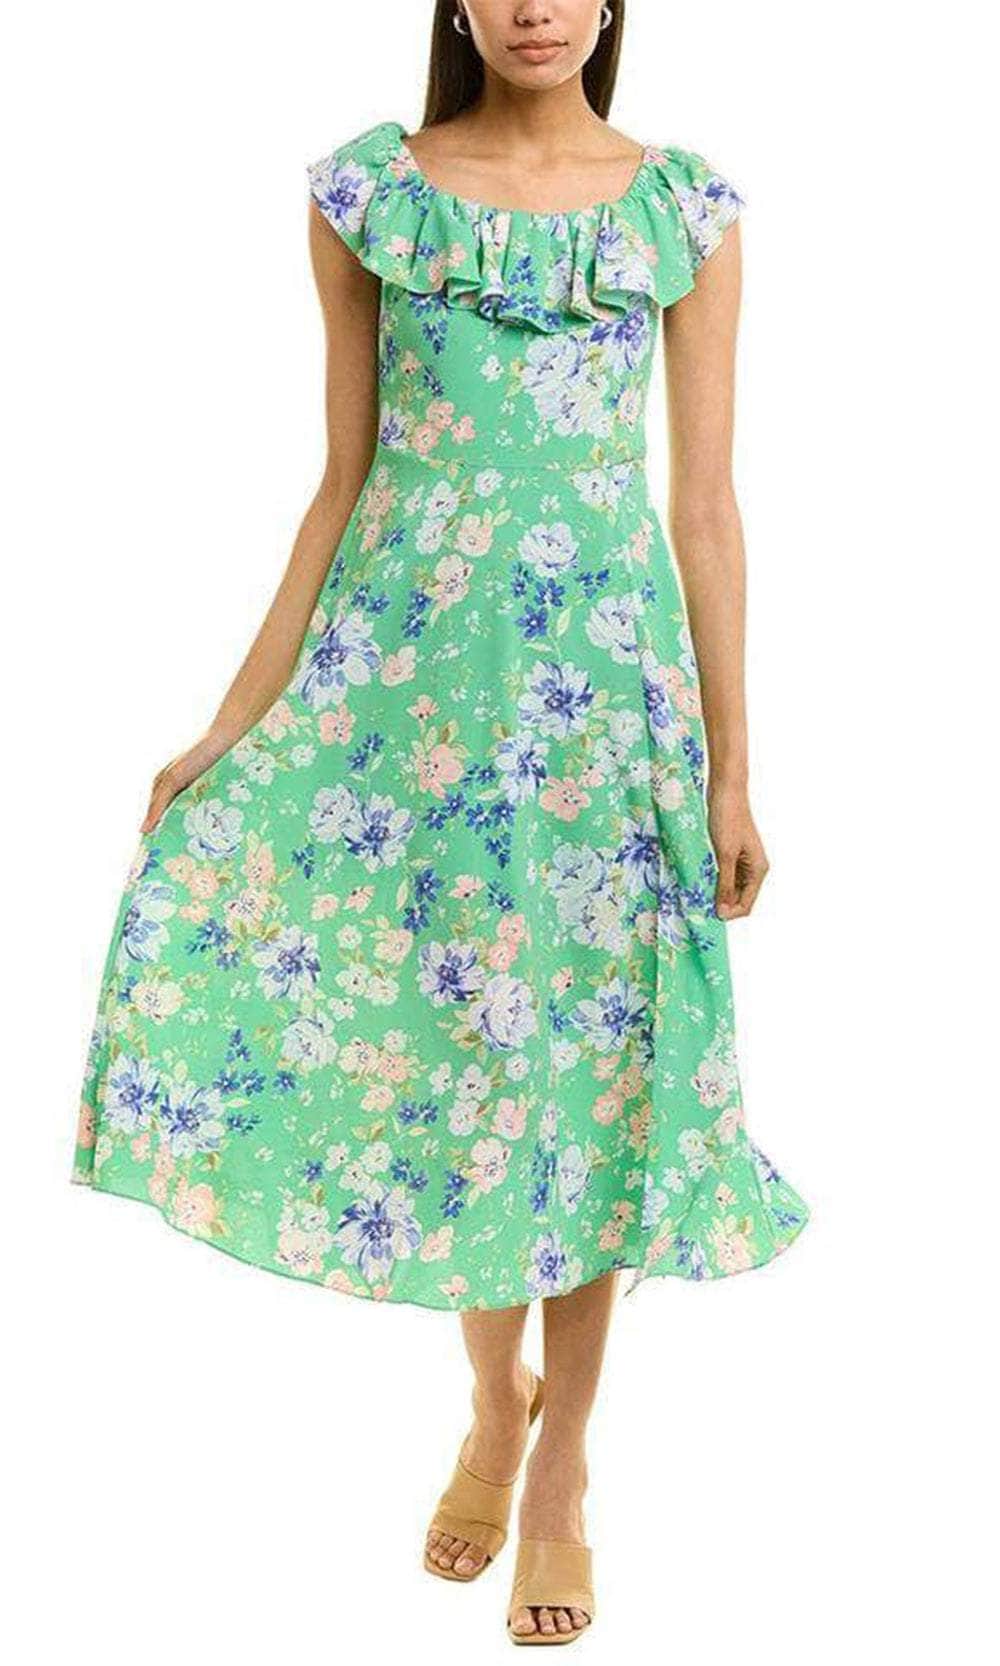 Image of Immediate Apparel GT03D71 - Ruffle Trimmed Floral Dress